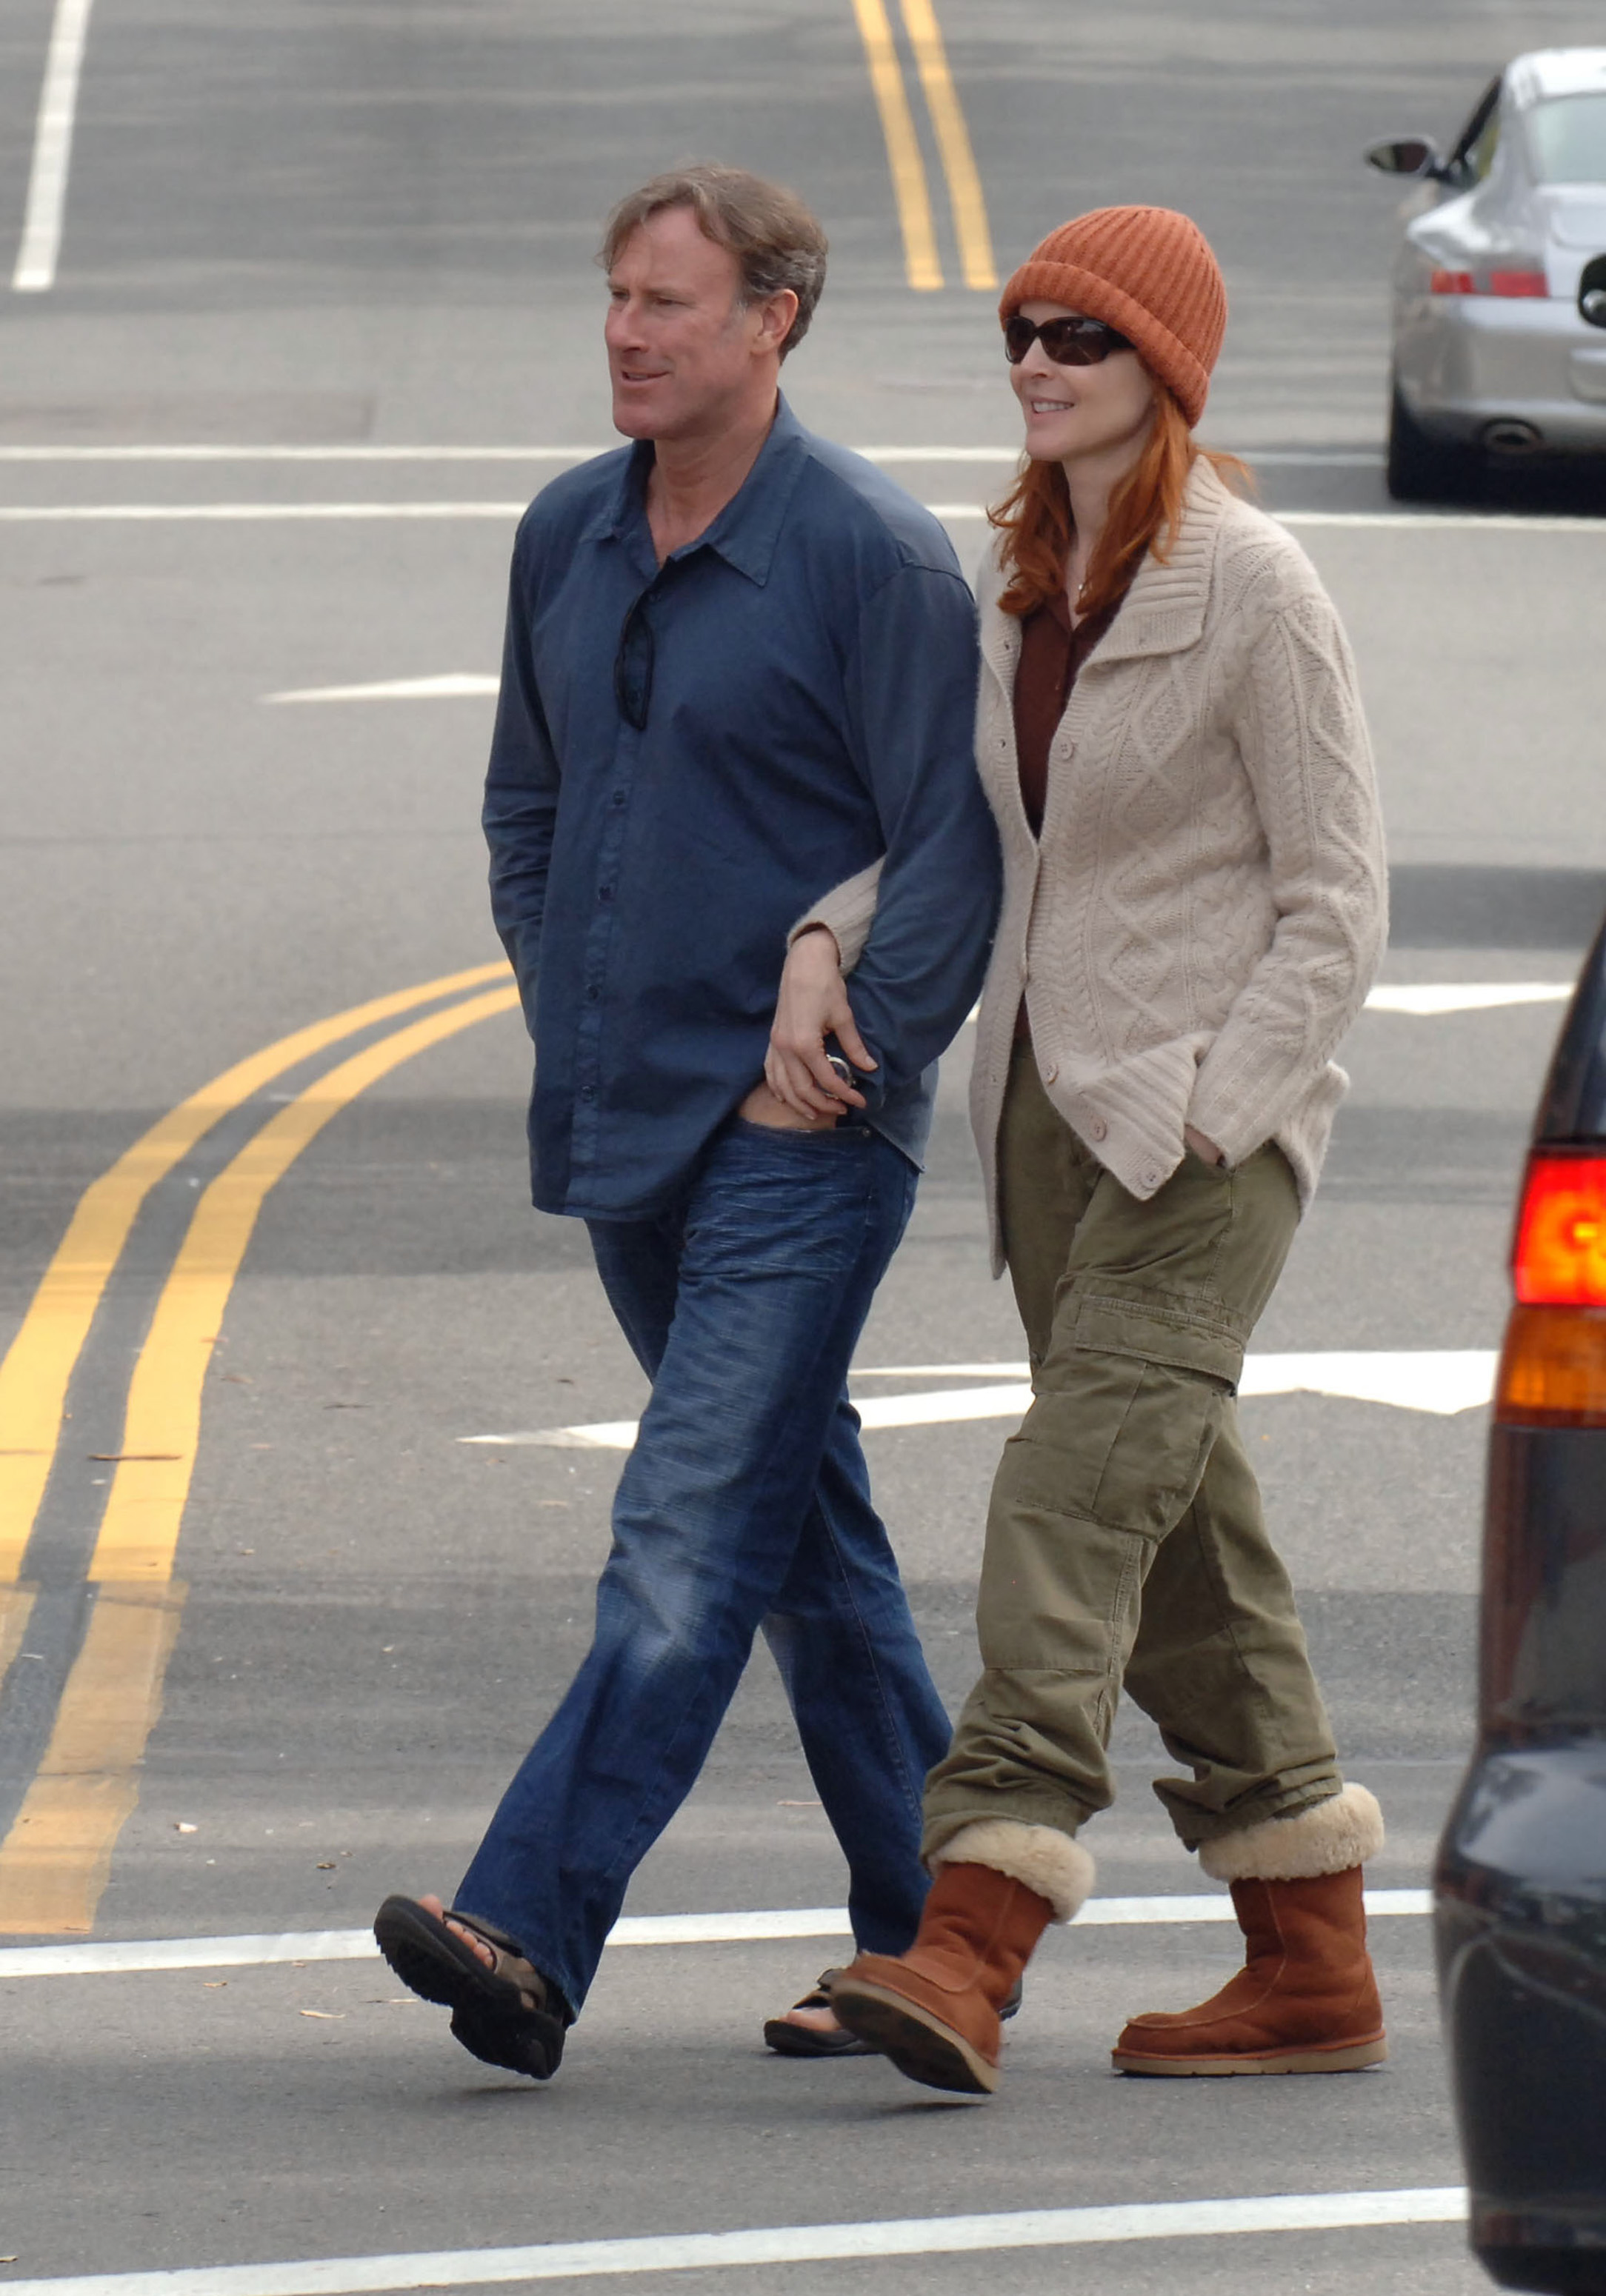 Tom Mahoney and Marcia Cross seen on March 26, 2006, in Los Angeles, California. | Source: Getty Images